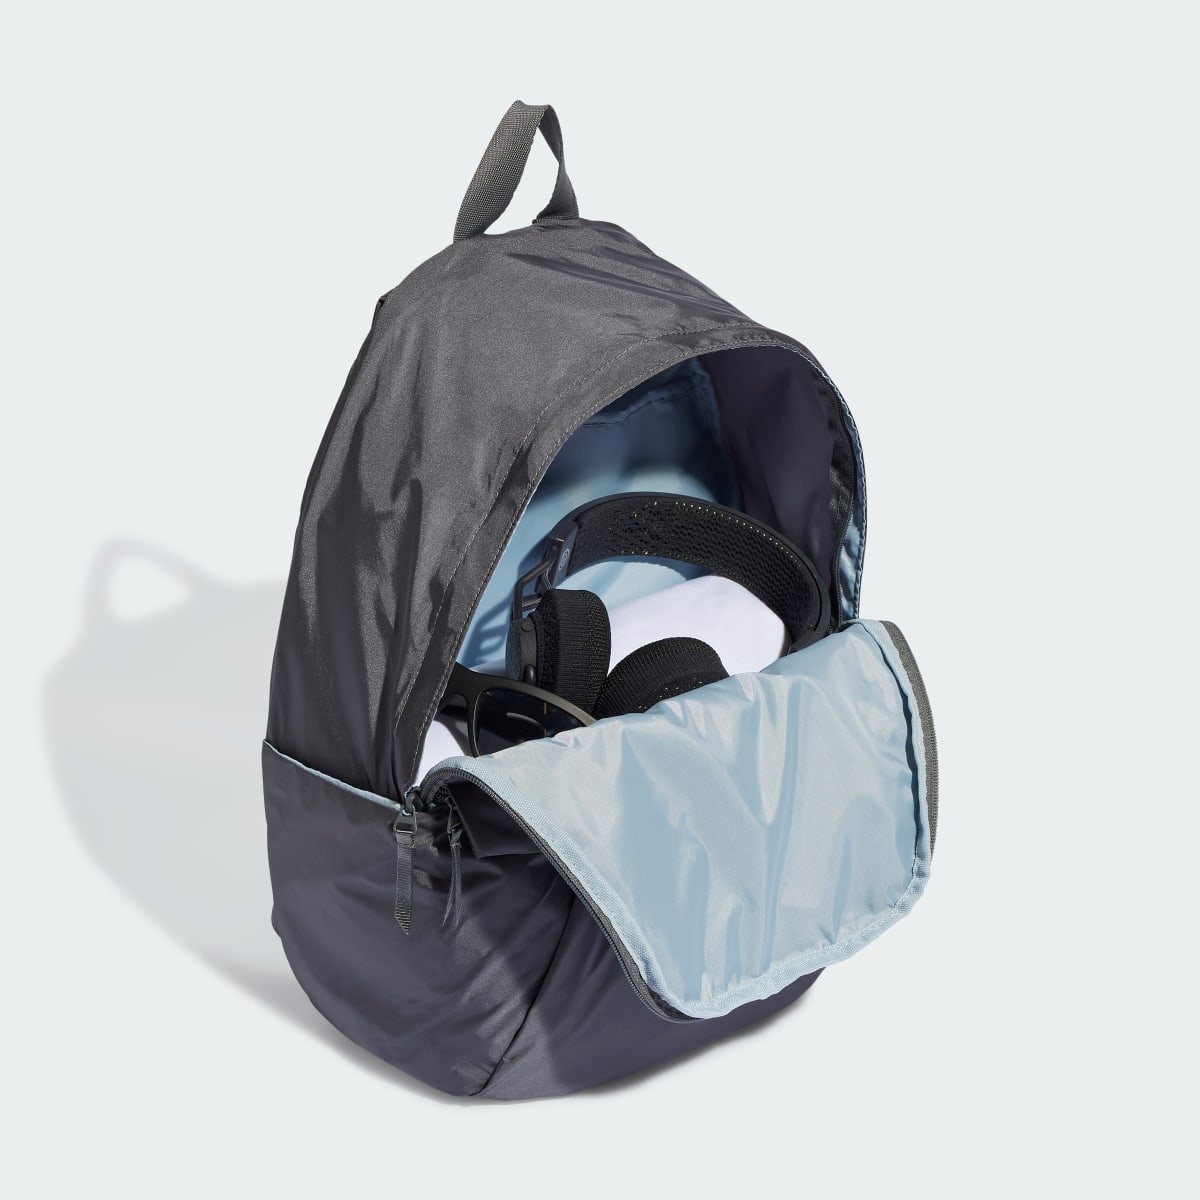 Adidas Classic Gen Z Backpack. 5